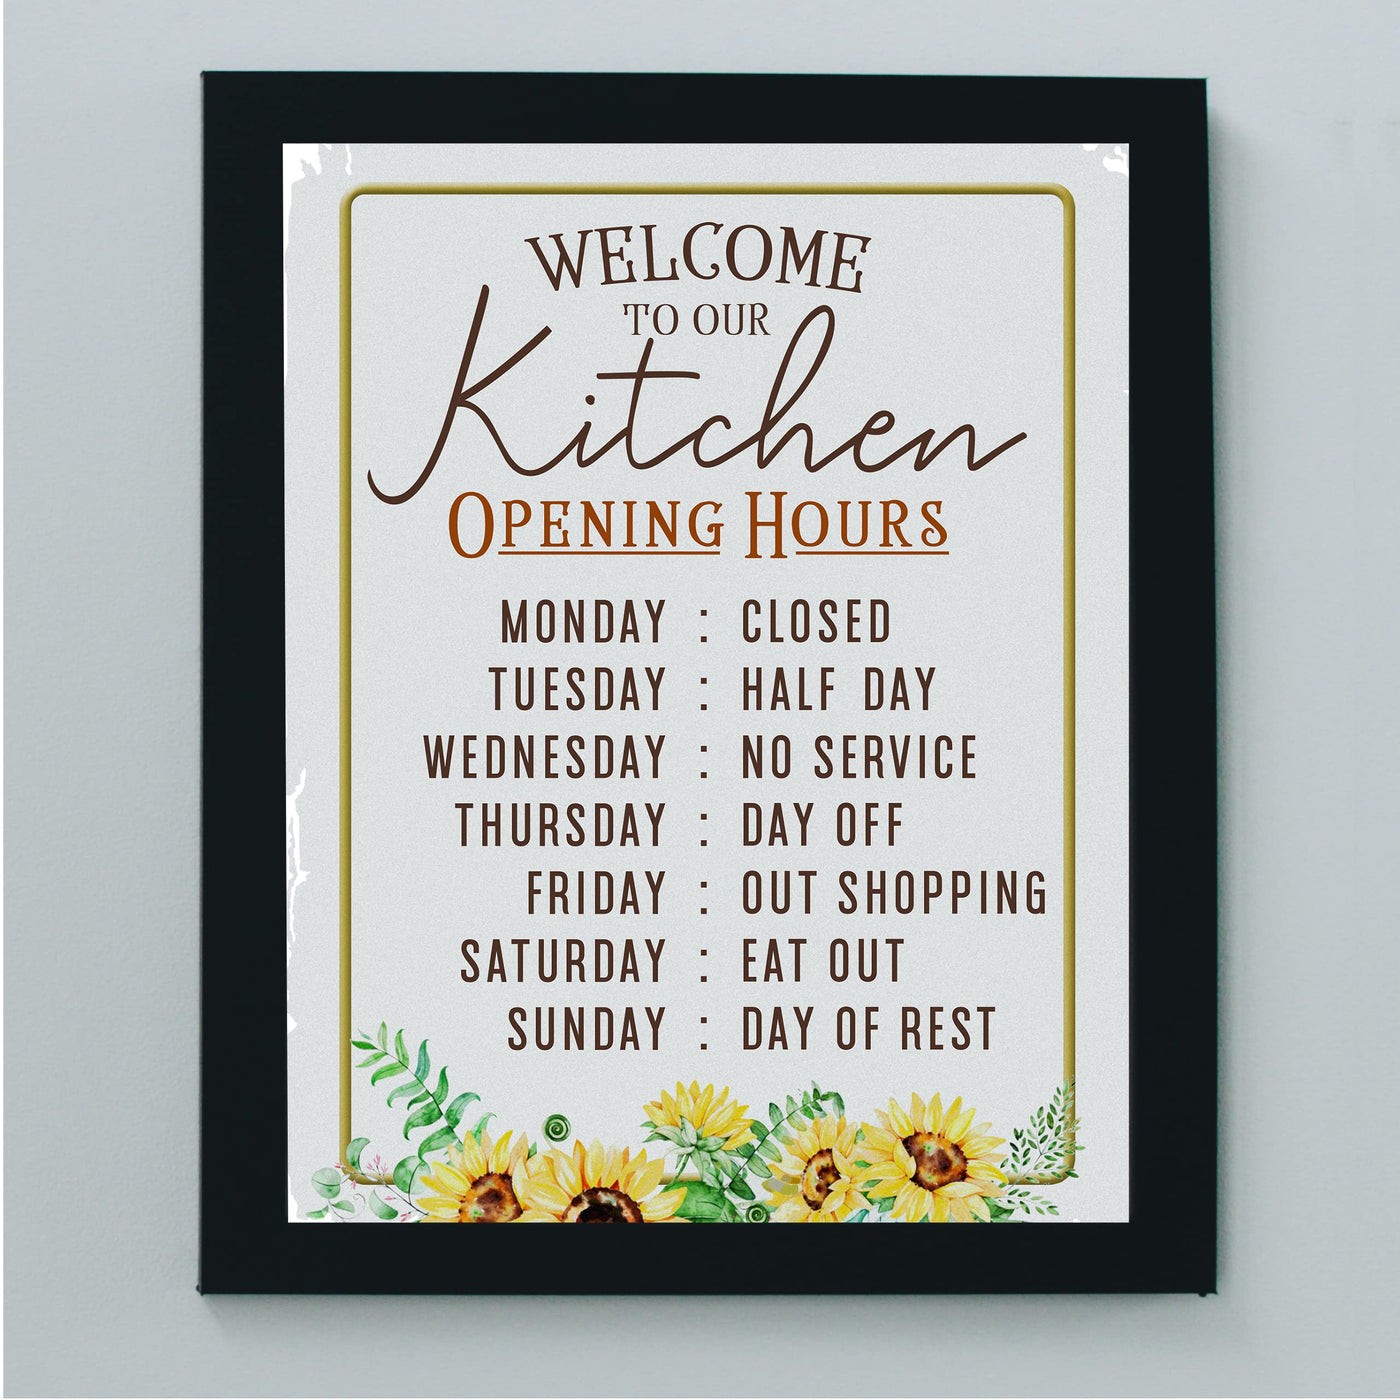 "Kitchen Opening Hours: Monday Closed" Funny Kitchen Wall Sign -11 x14" Typographic Farmhouse Wall Art Print -Ready to Frame. Perfect Home, Kitchen, & Dining Decor. Fun for Family & Guests!